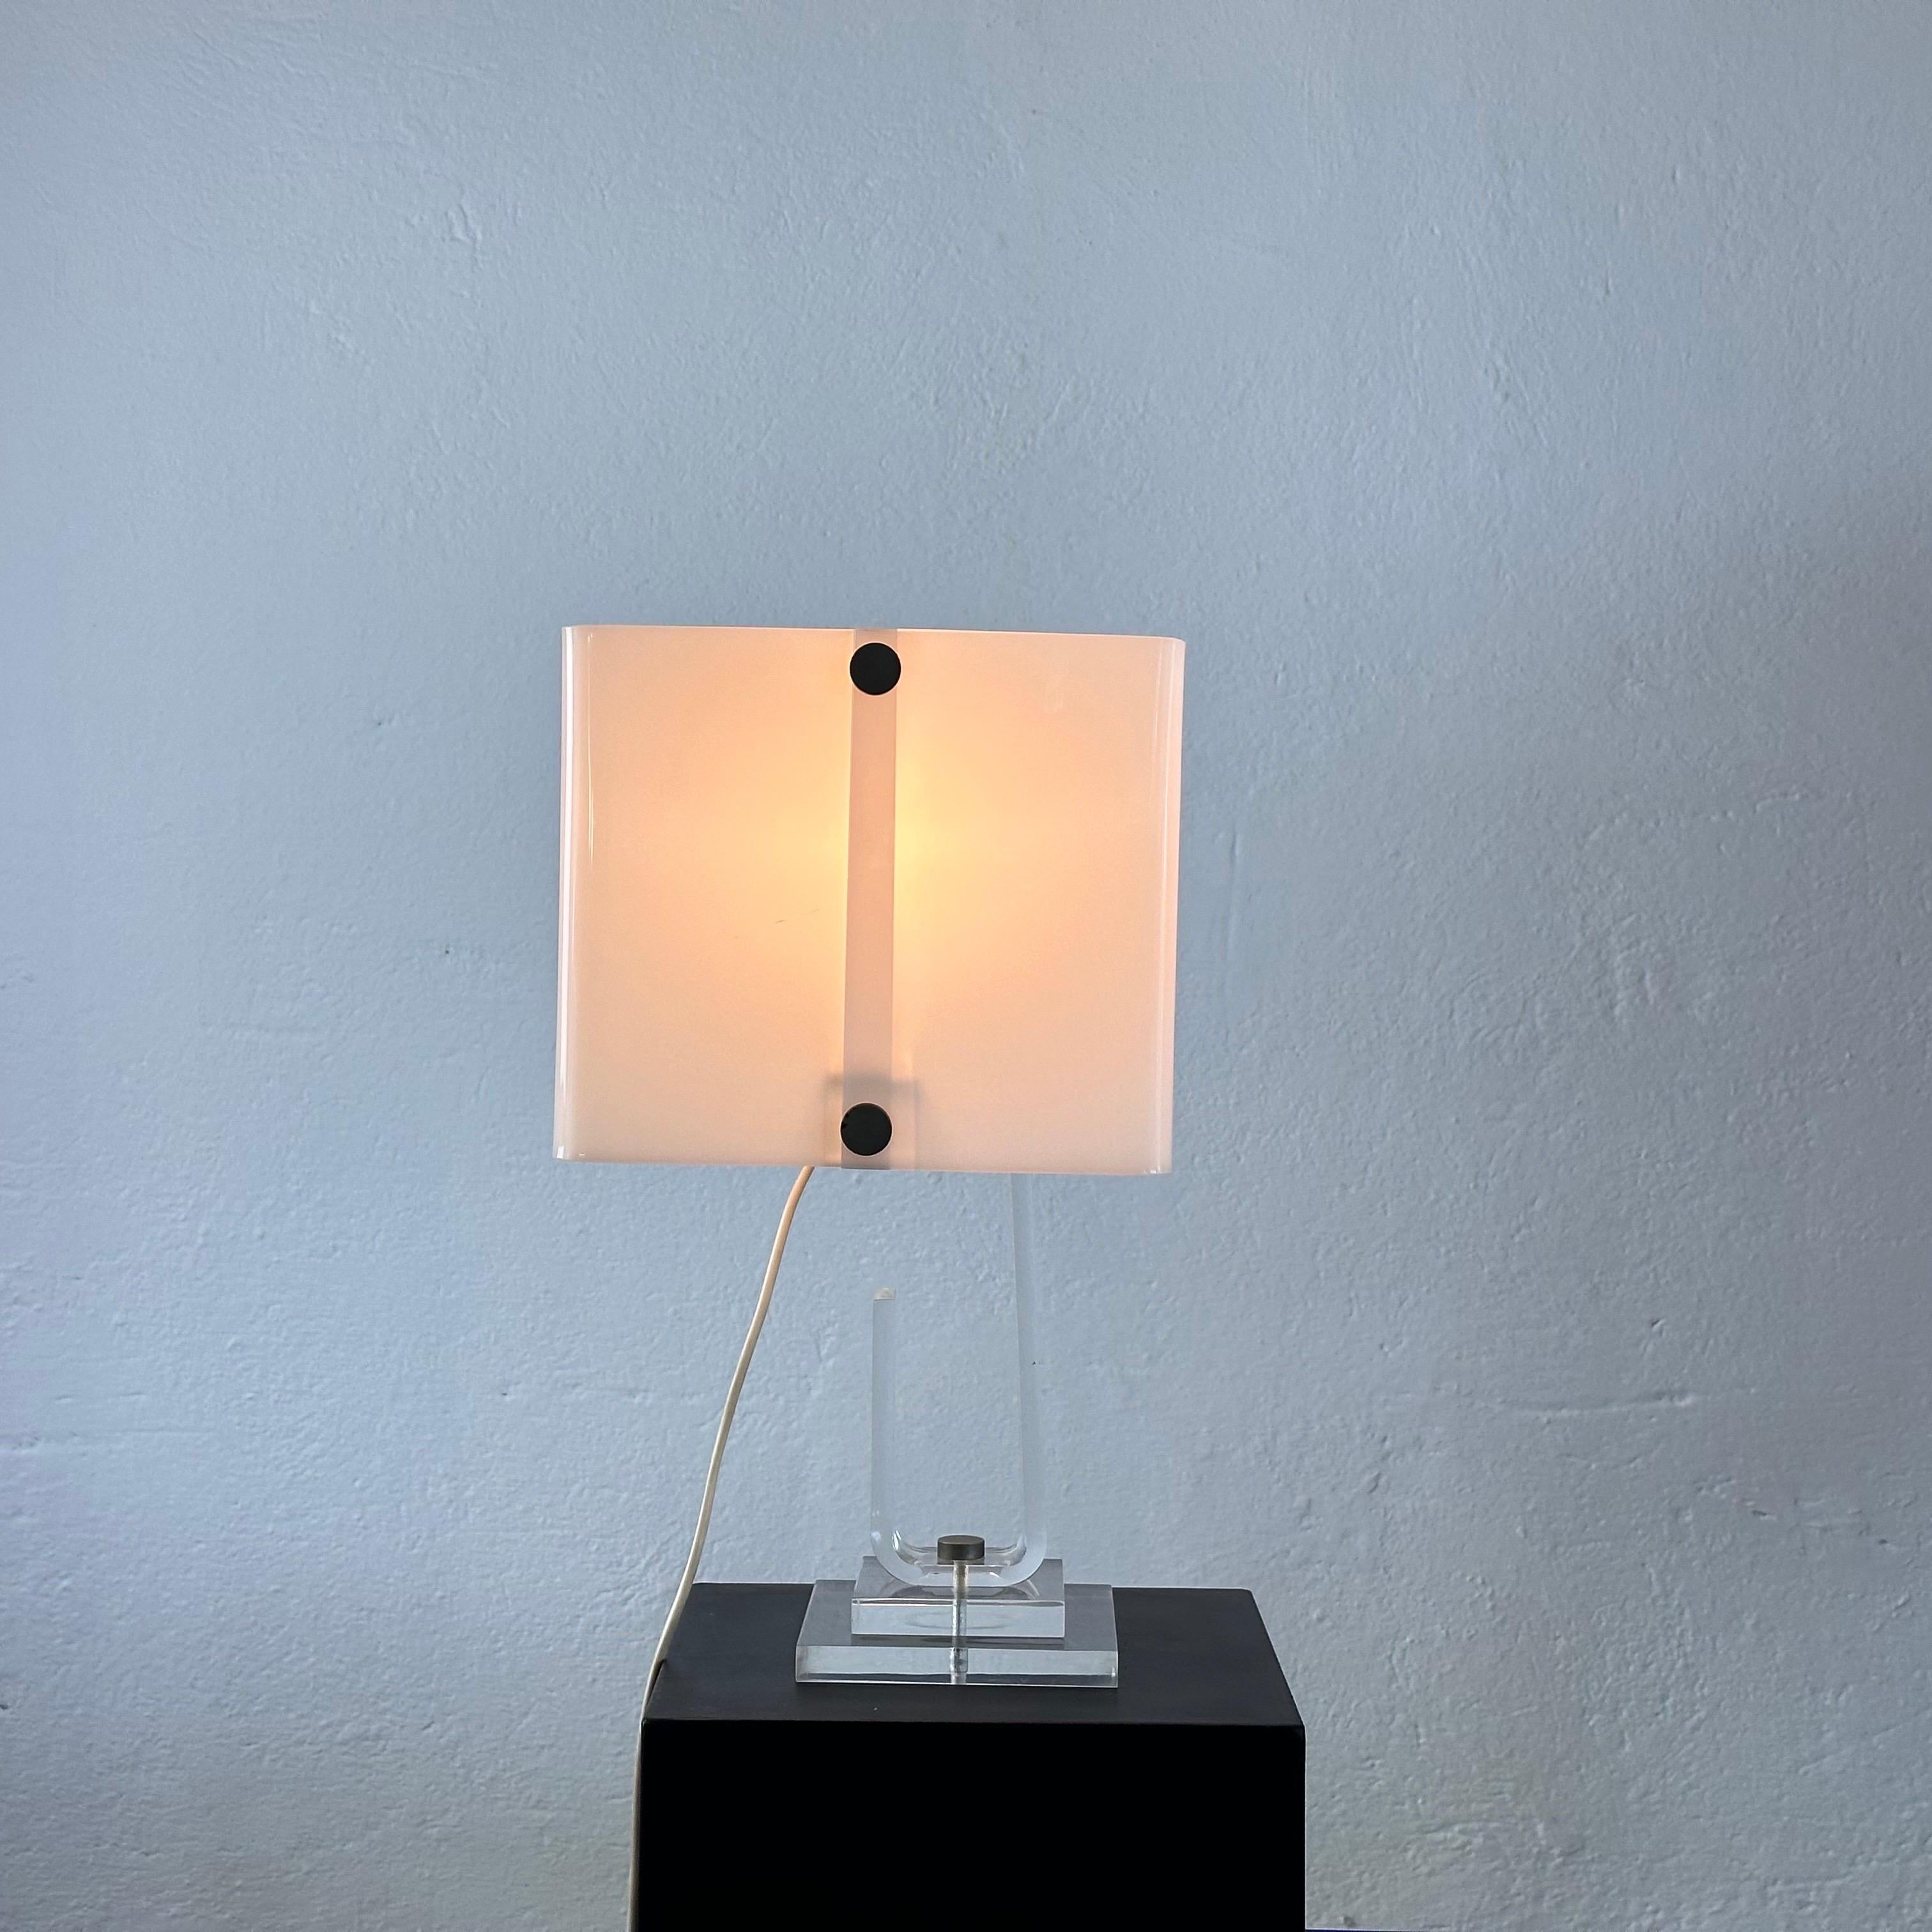 Italian Exquisite Sandro Petti Plexiglass and Brass Table Lamp from Rome, 1970s For Sale